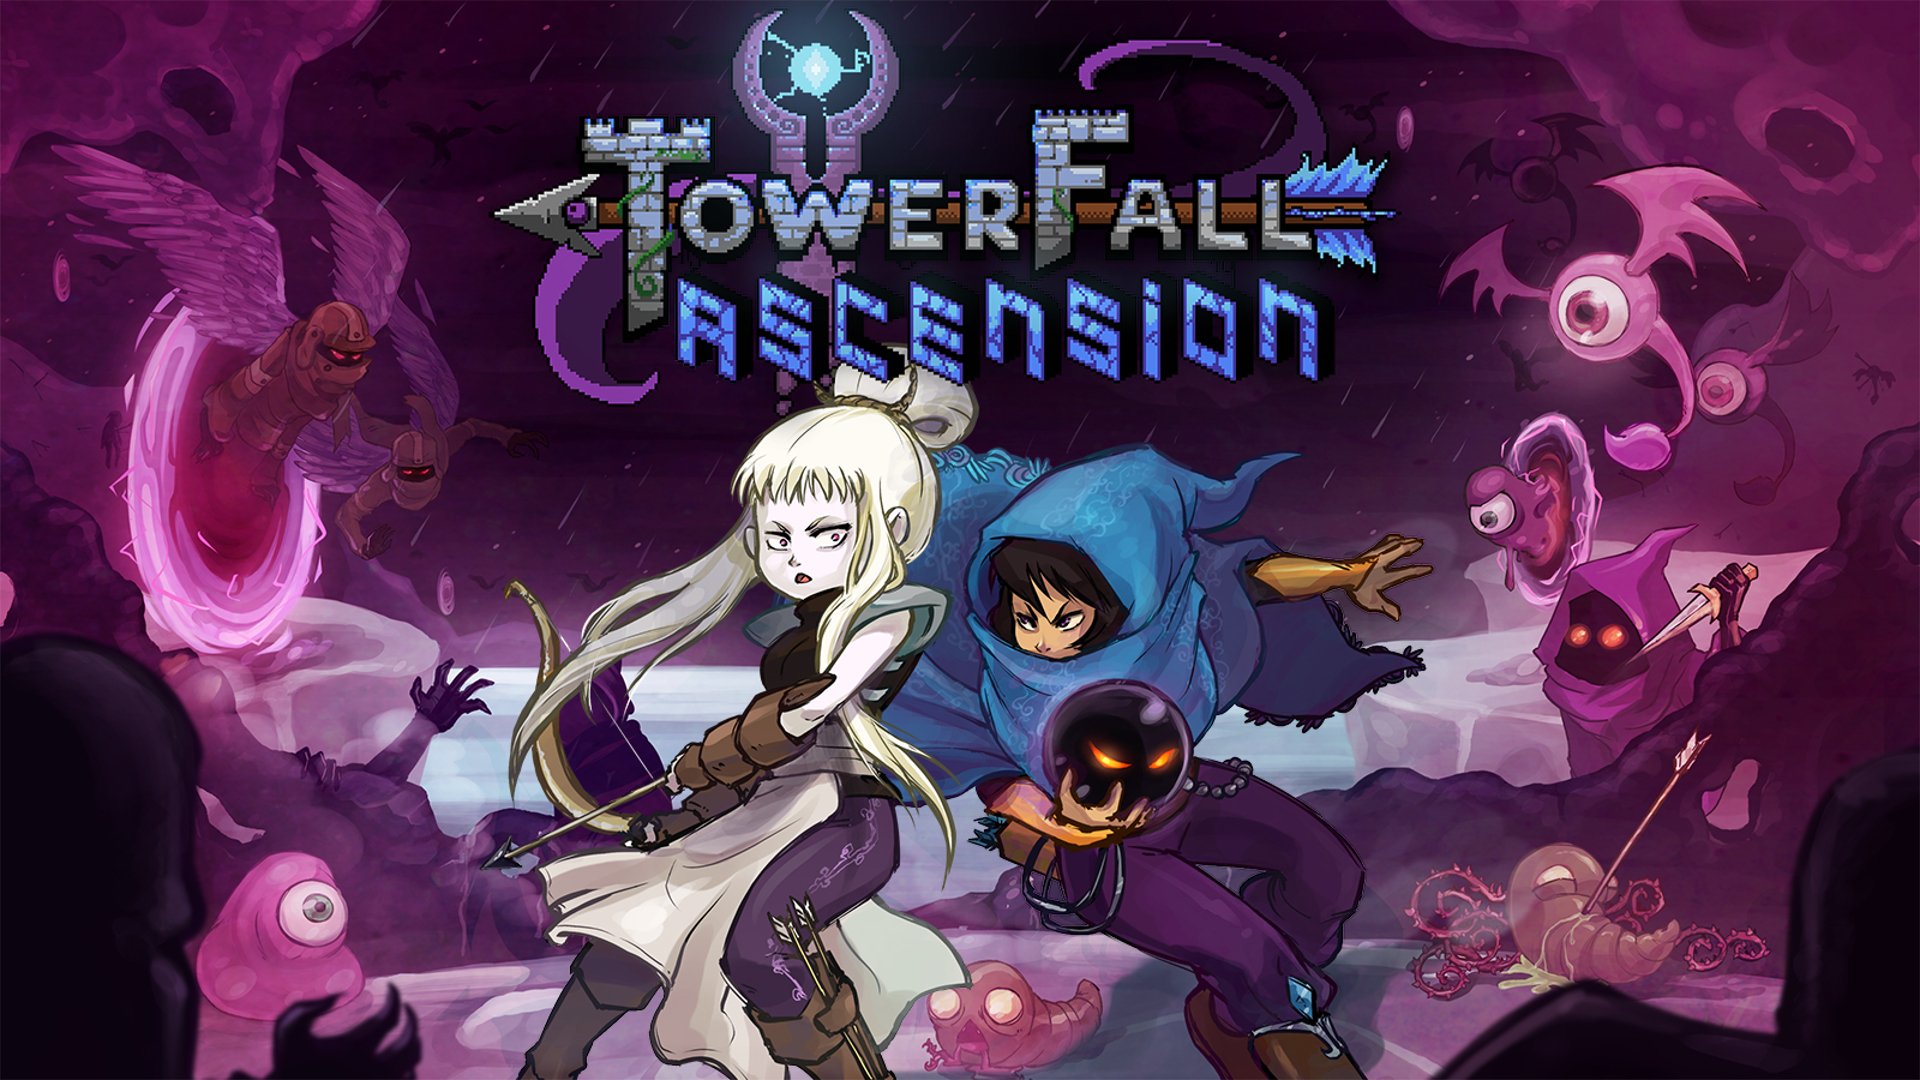 Towerfall Ascension HD Wallpaper Background Image